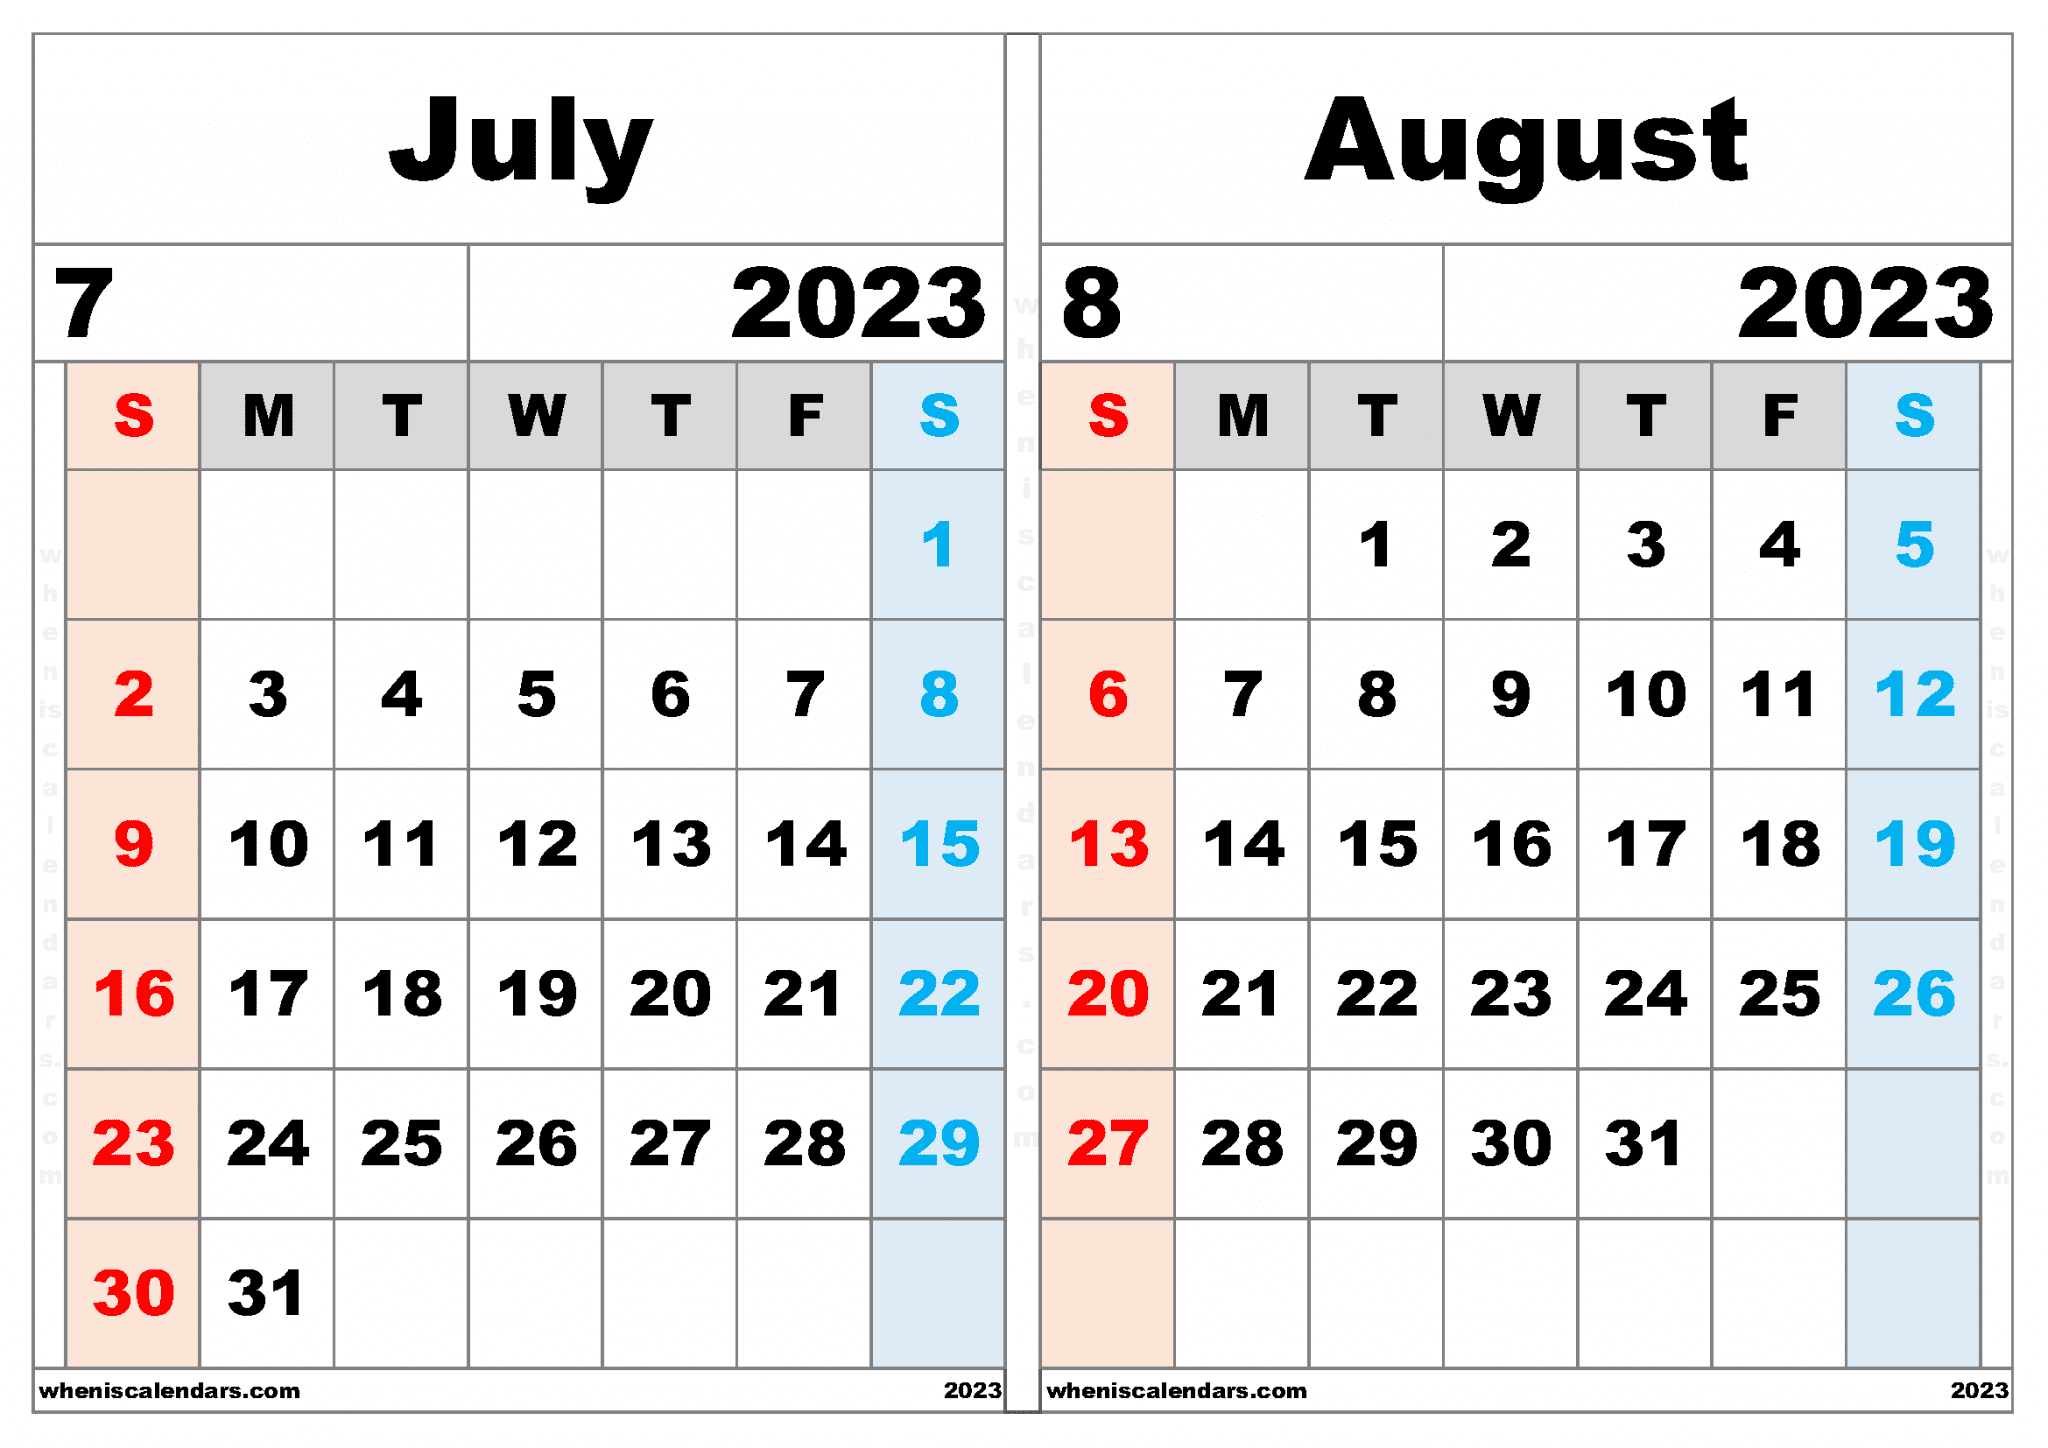 july-and-august-2023-calendar-calendar-quickly-riset